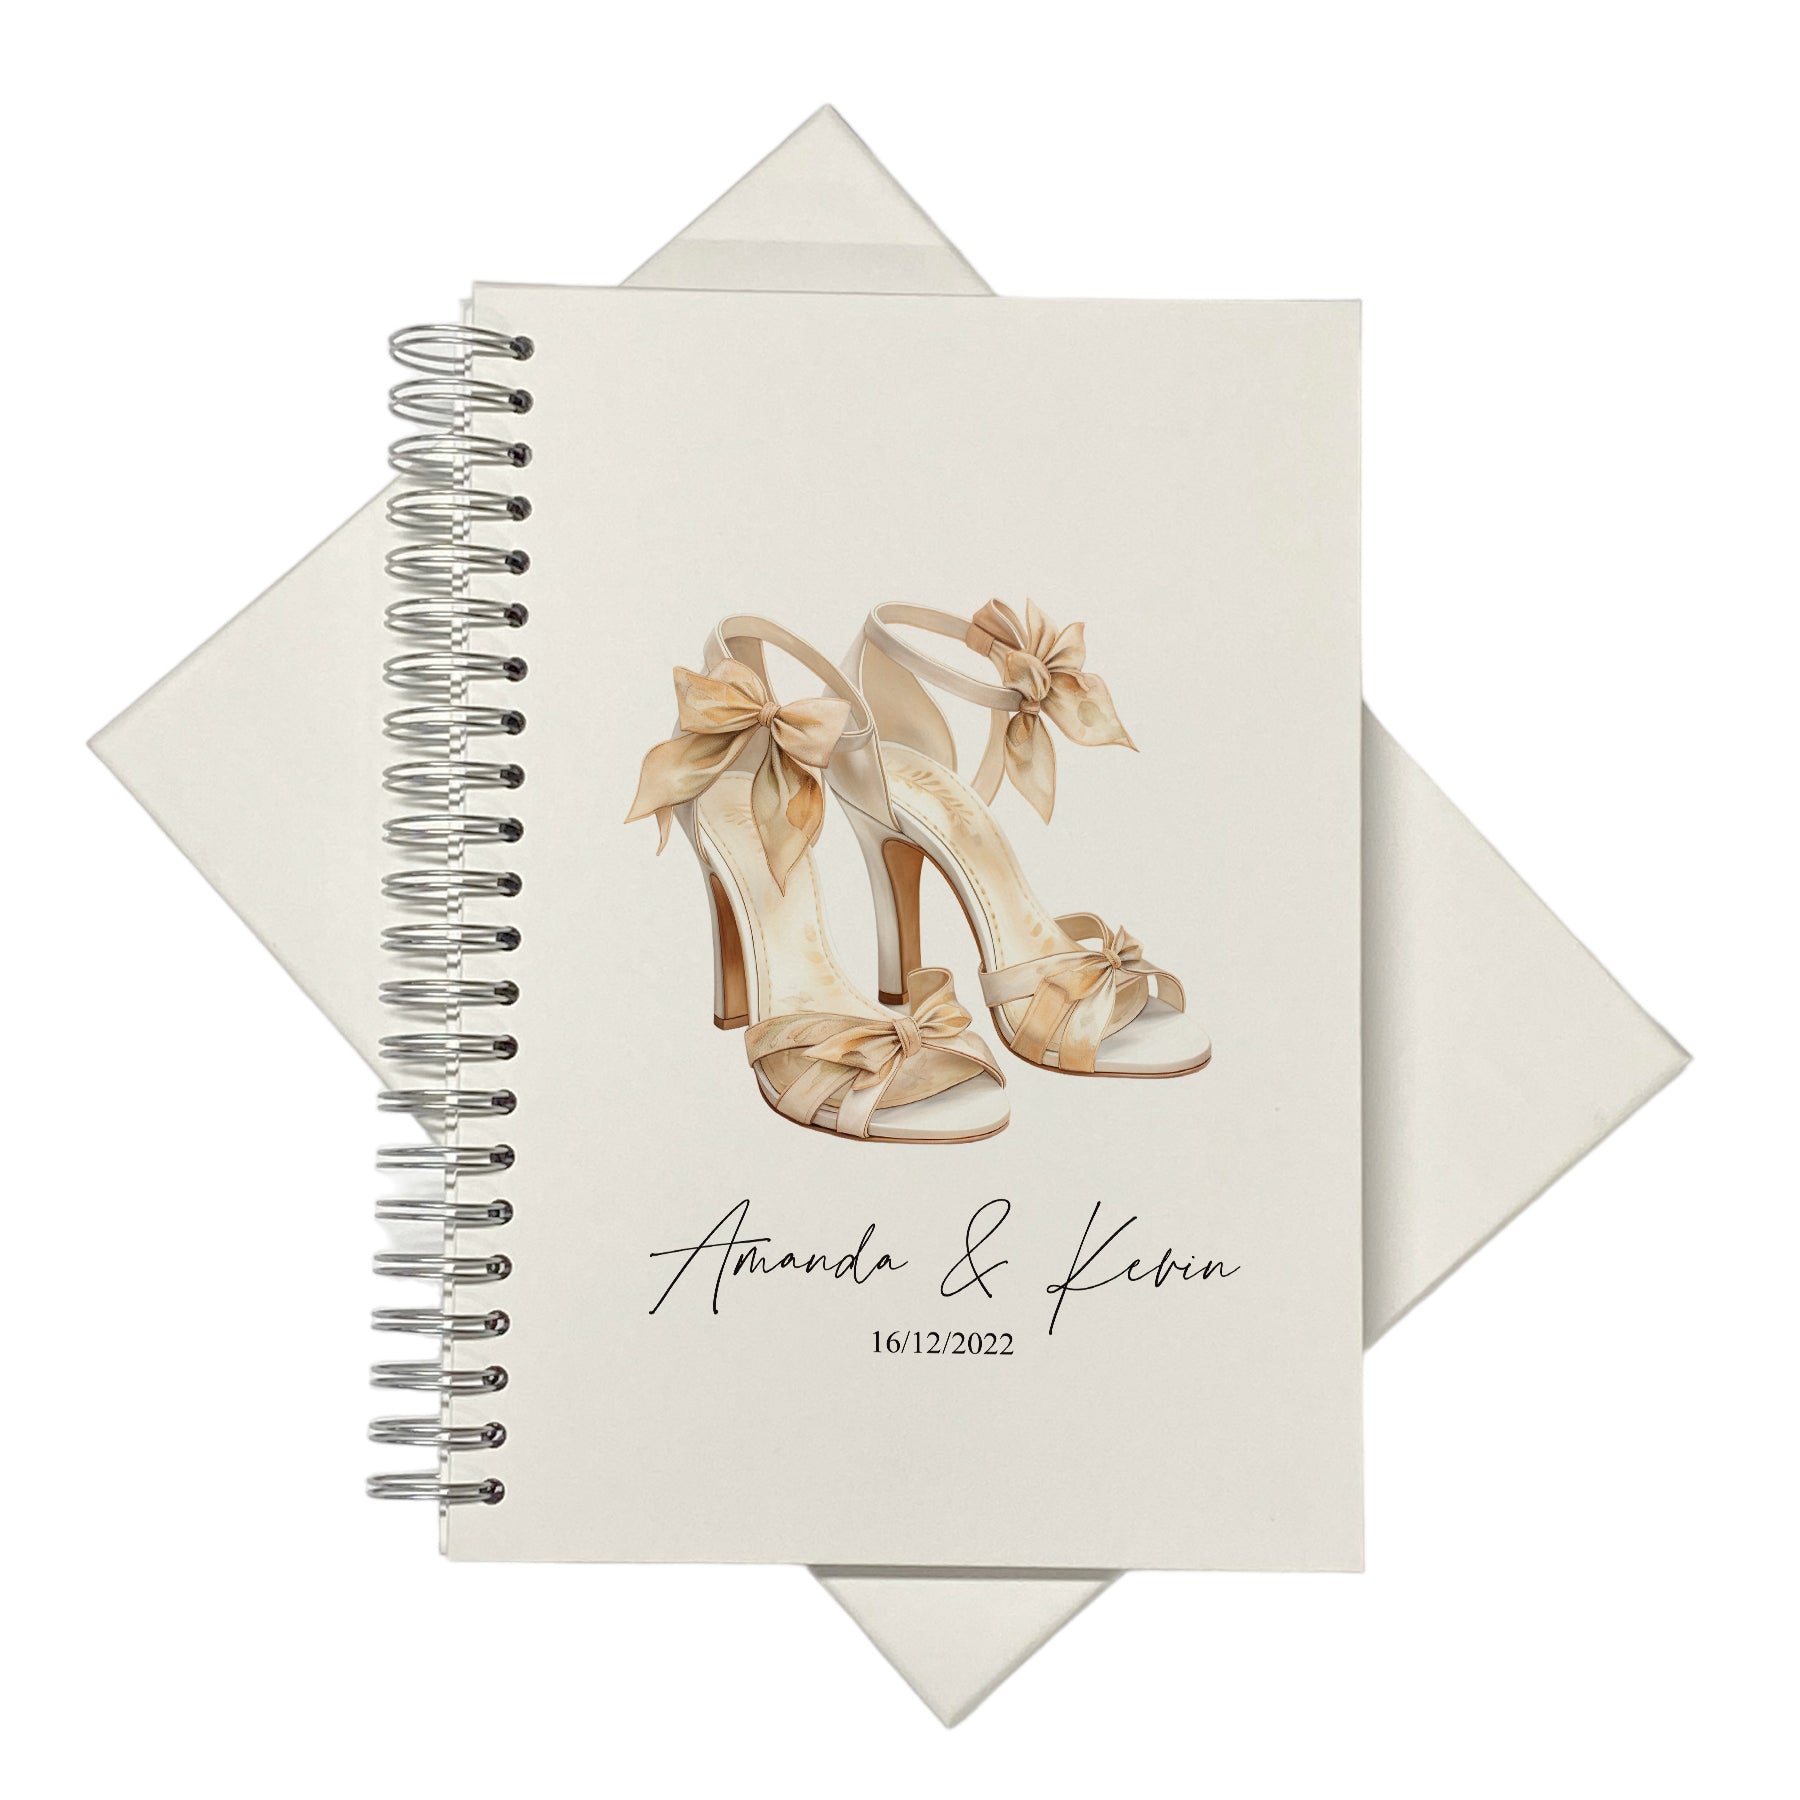 Large A4 Wedding Album Scrapbook Guest Book Boxed With Bridal Shoes